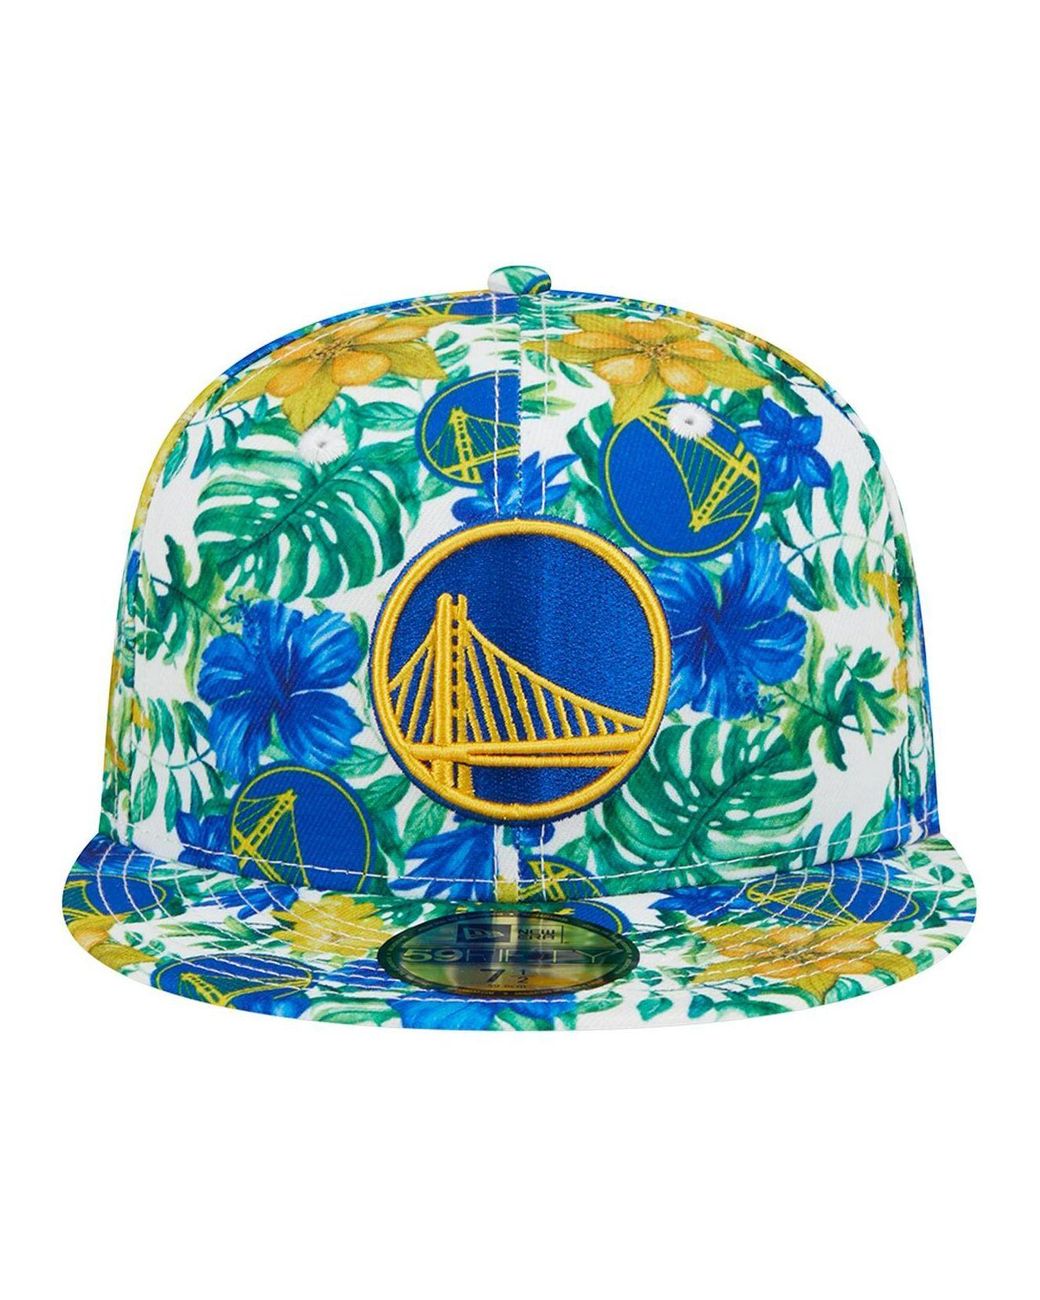 New Era Royal Golden State Warriors 6X NBA Finals Champions Crown 59FIFTY Fitted Hat